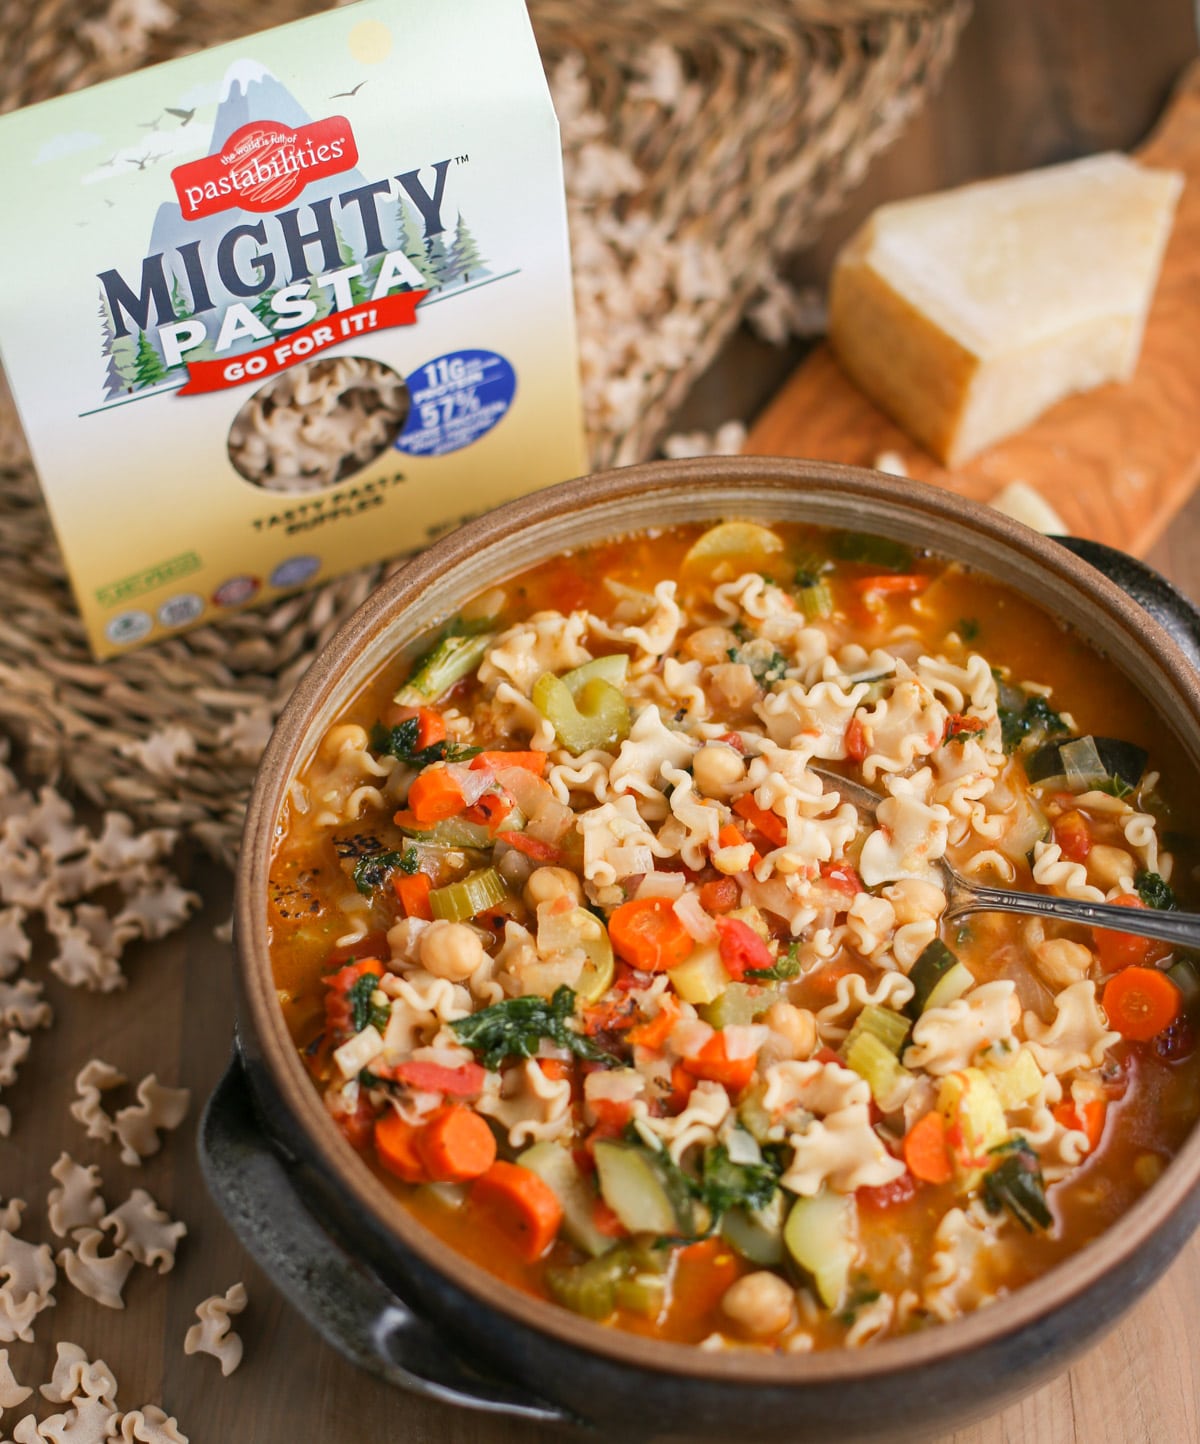 Mighty Minestrone Soup bowl with box of Mighty Pasta